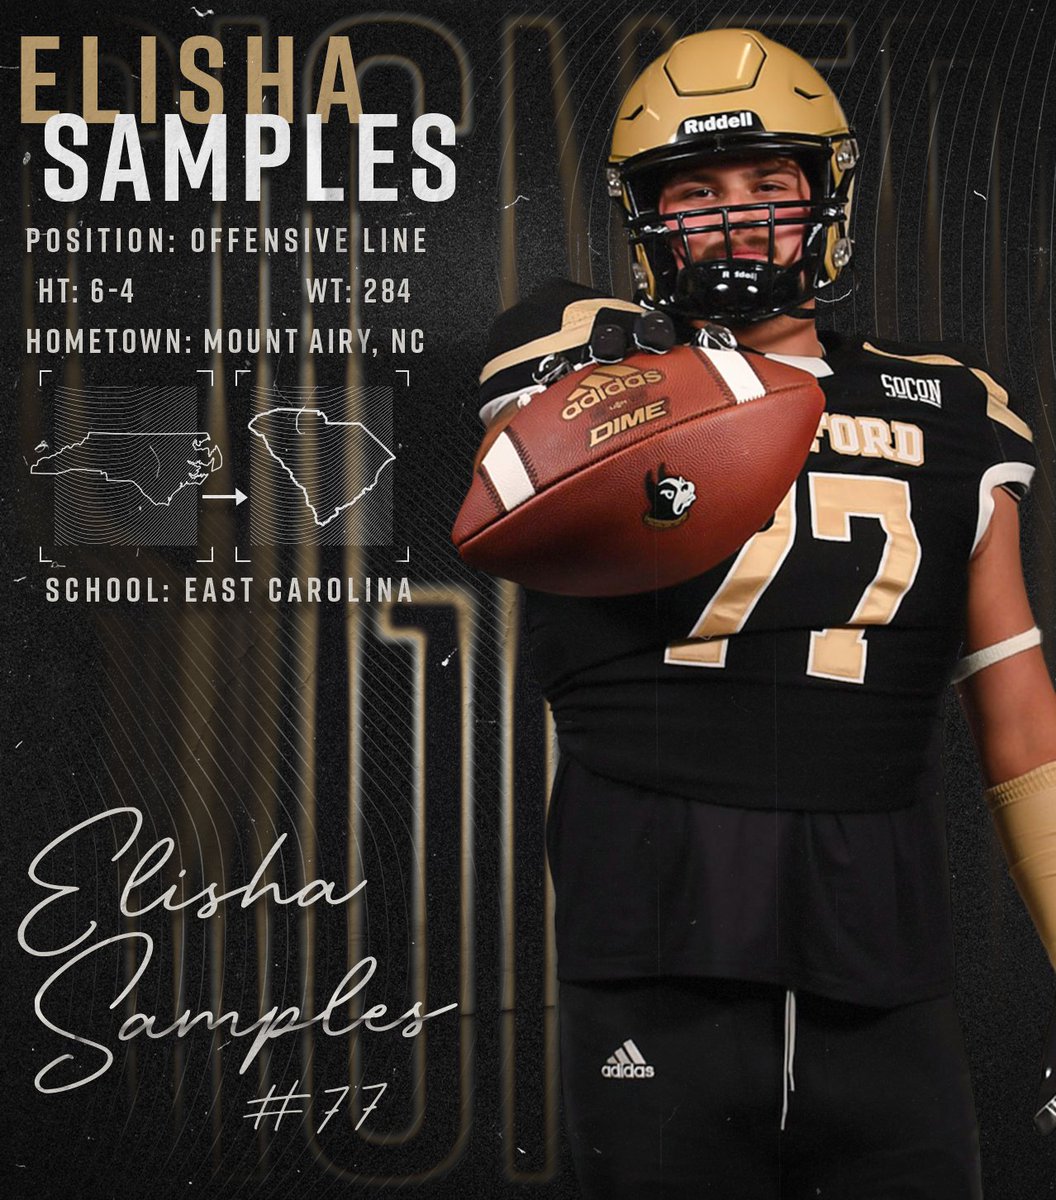 A transfer from East Carolina, Elisha Samples joins the Terriers on the offensive line.